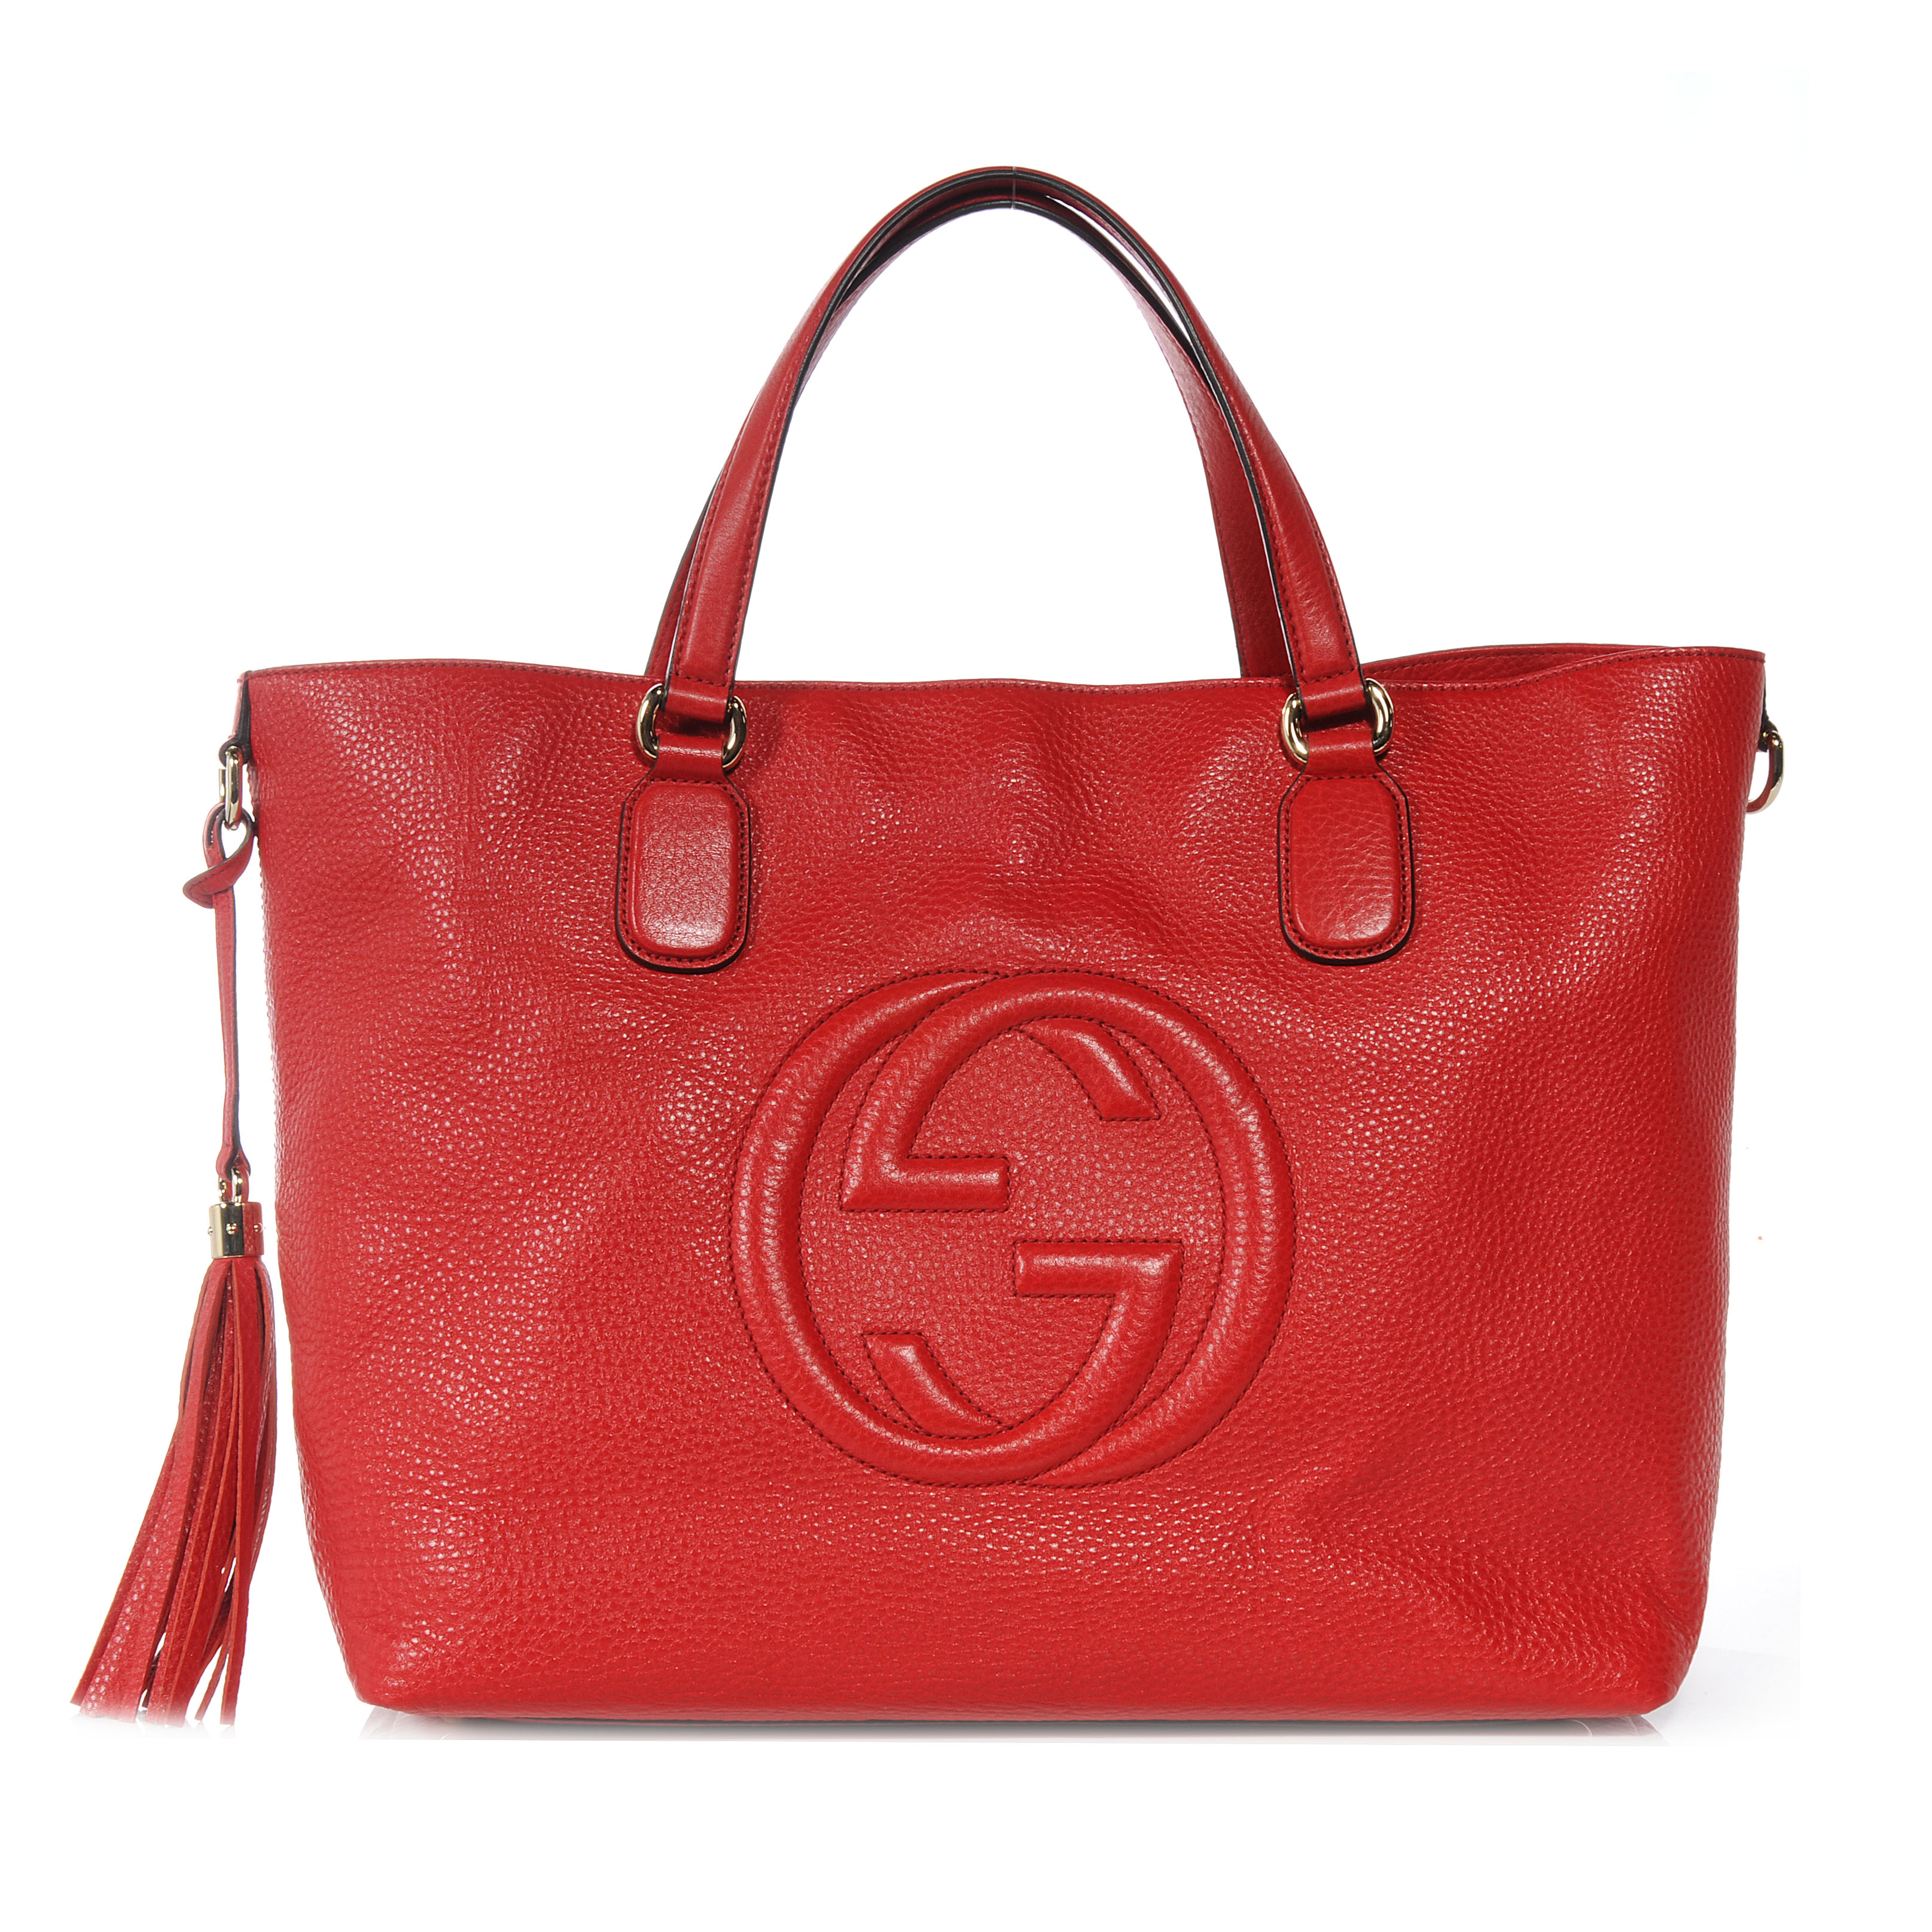 GUCCI Leather Medium Soho Tote Red 55685